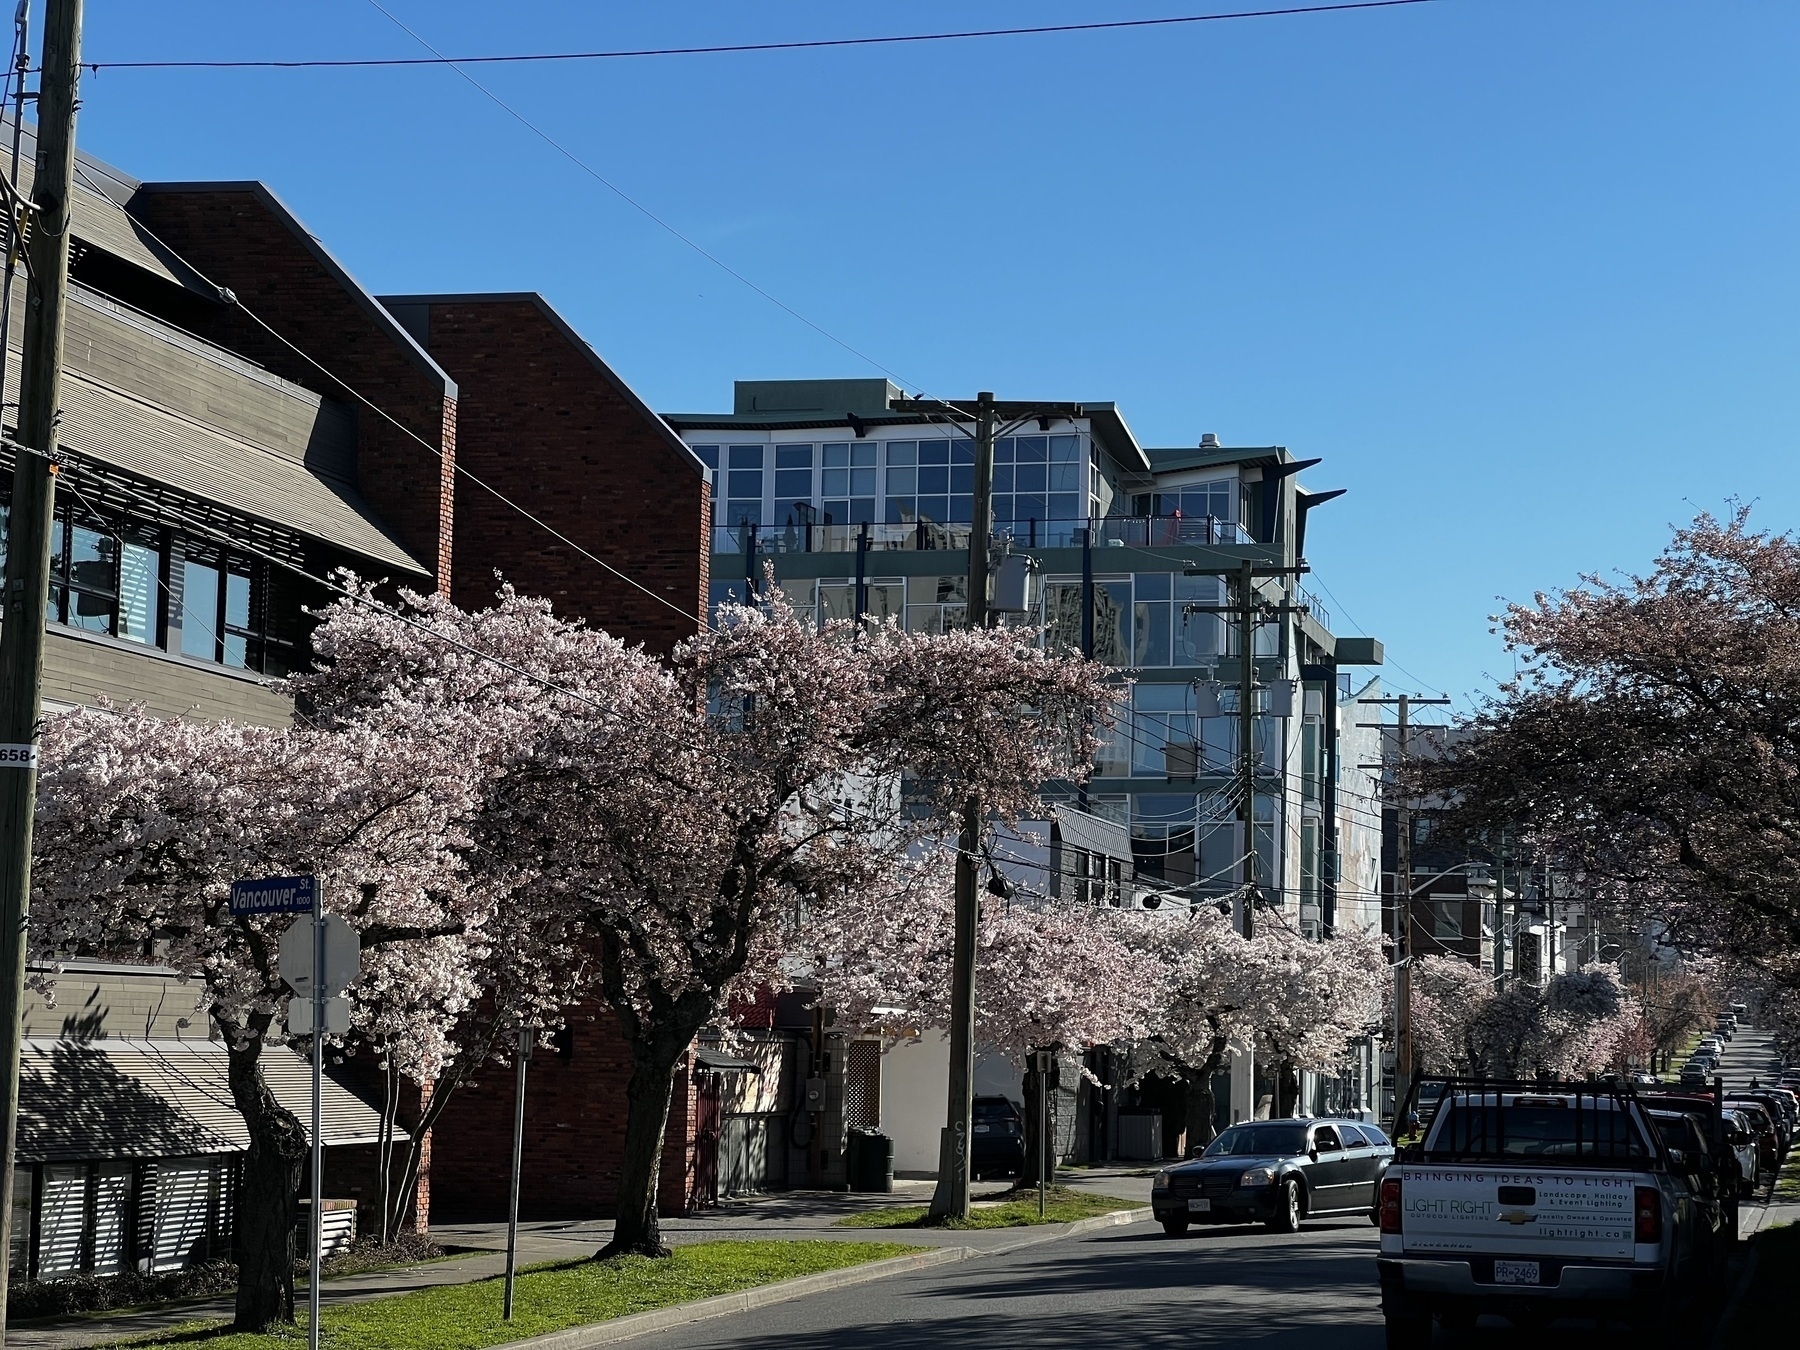 Shot of a cherry-tree lined residential street with mid-rise apartments on each side. The cherry trees are all in bloom.